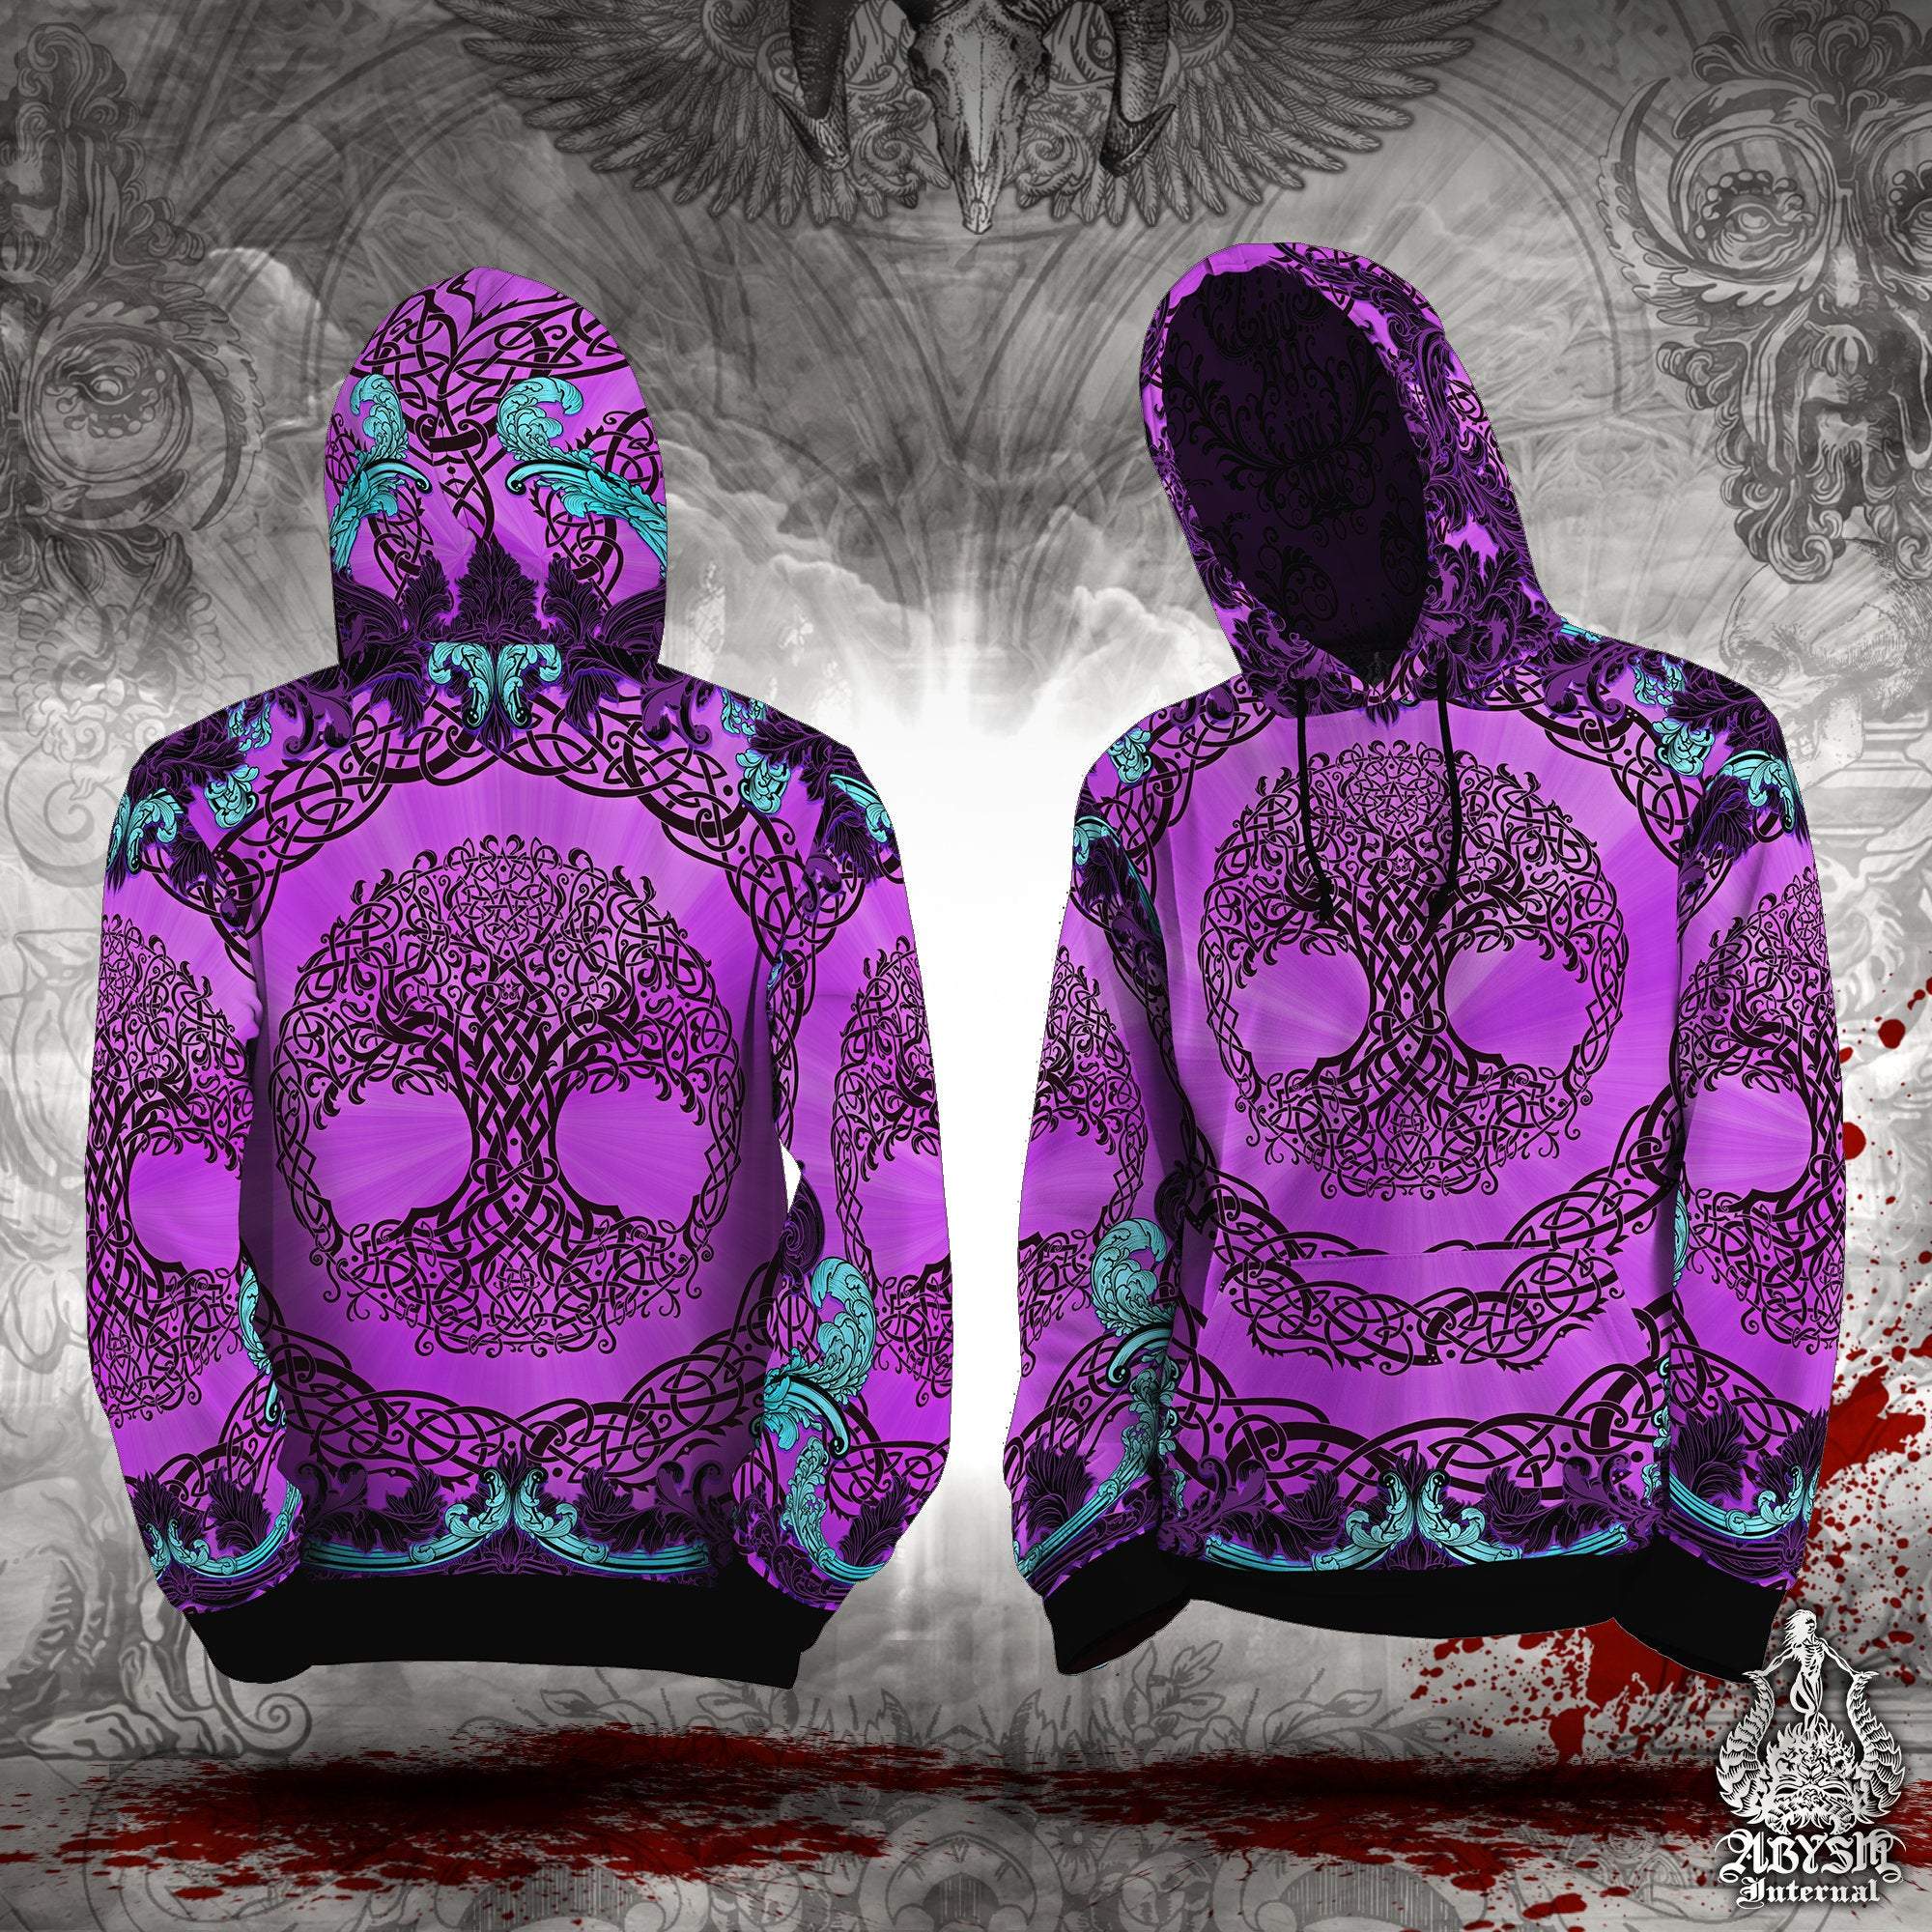 Witchy Hoodie, Pagan Streetwear, Witch Outfit, Pastel Goth Sweater, Alternative Clothing, Unisex - Purple Celtic Tree of Life - Abysm Internal